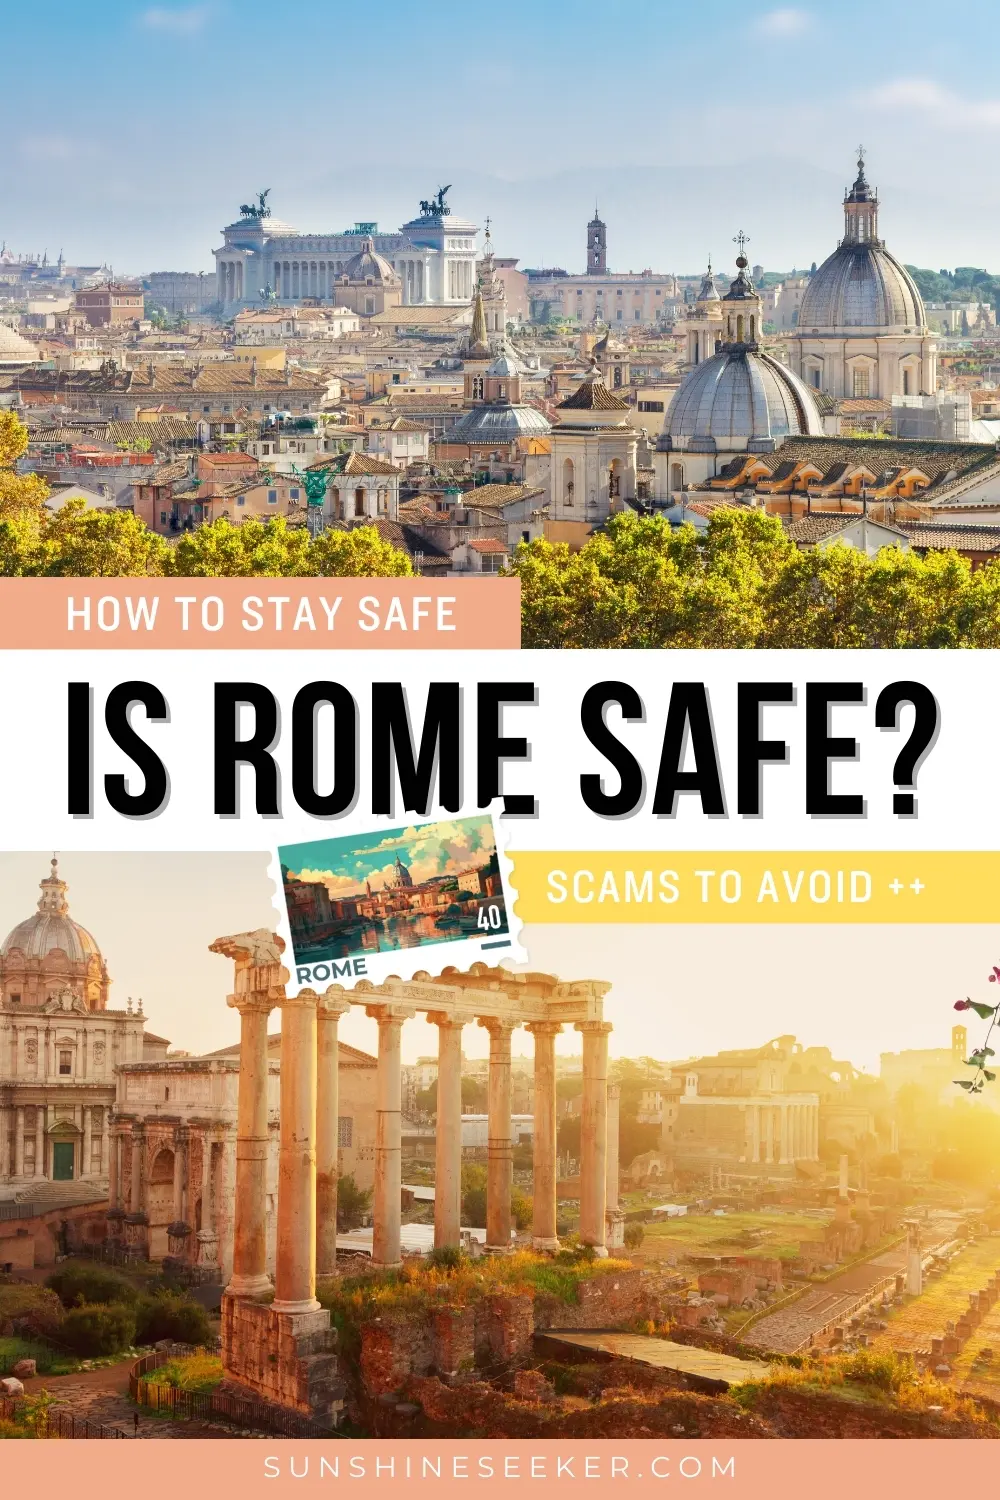 Is Rome safe? Click through for easy tips on how to stay safe in Rome, Italy.